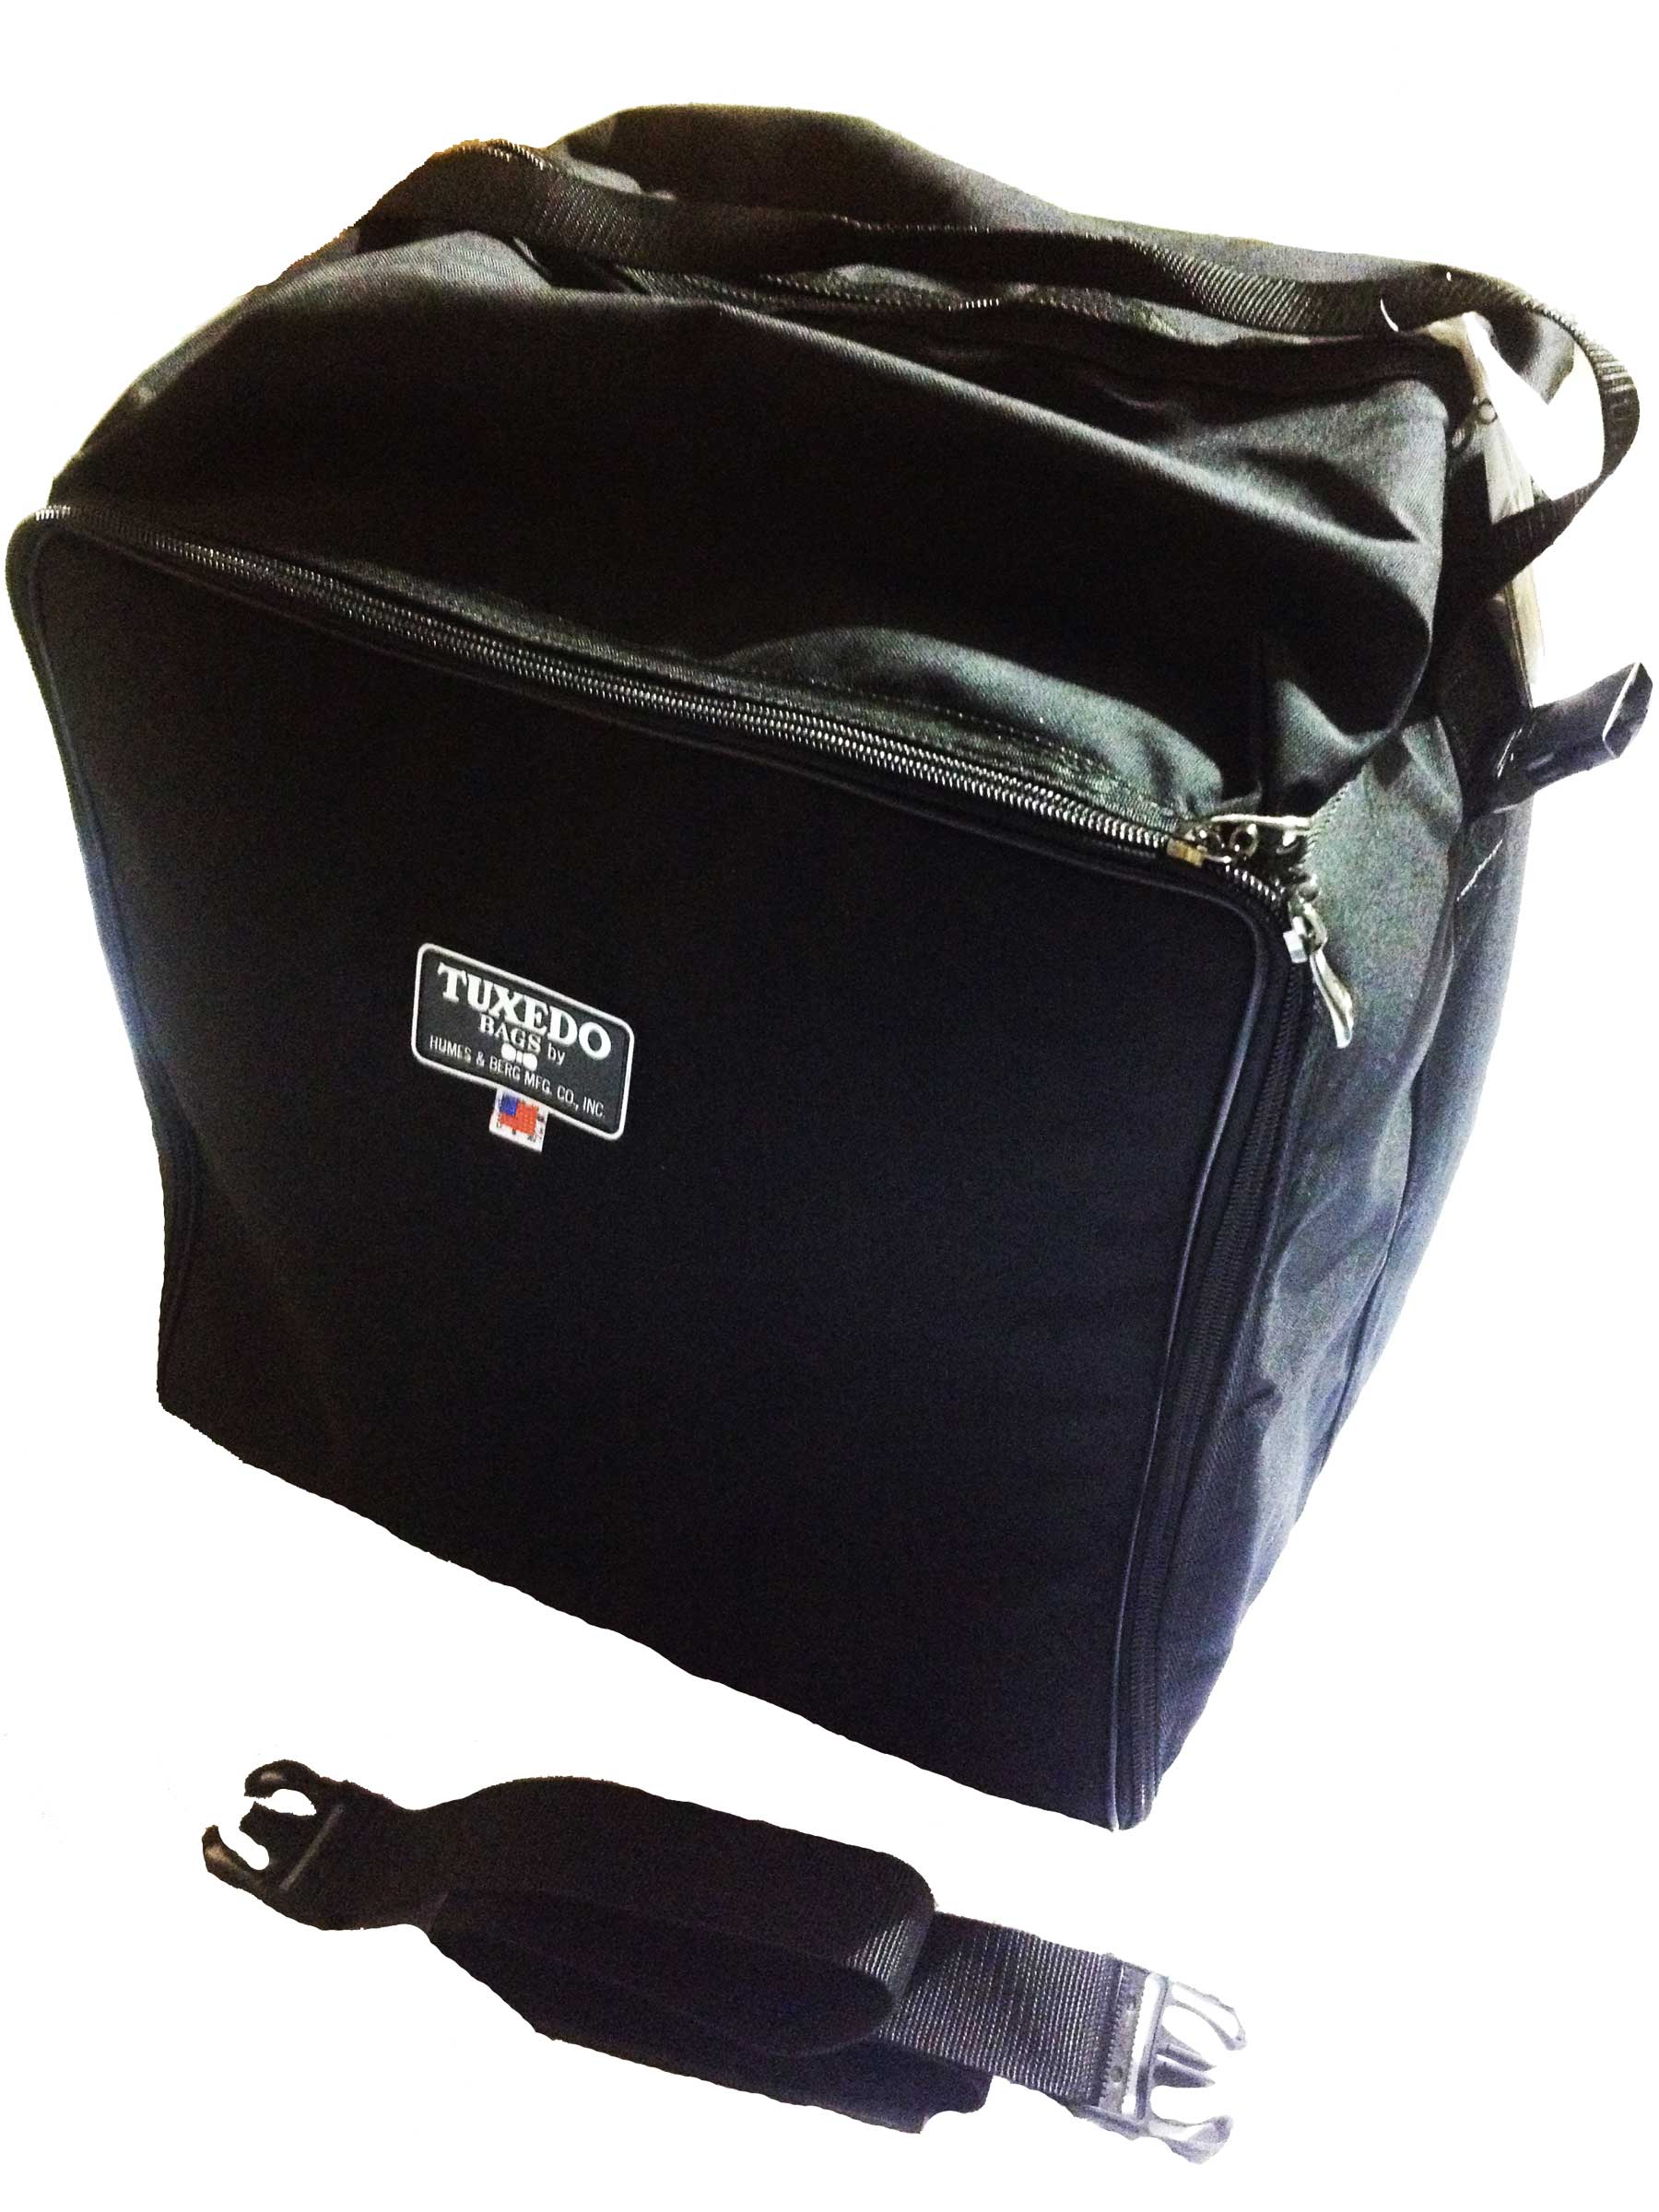 H&B Tuxedo Square 5 x 14 Inches Ext Snare Drum Bag